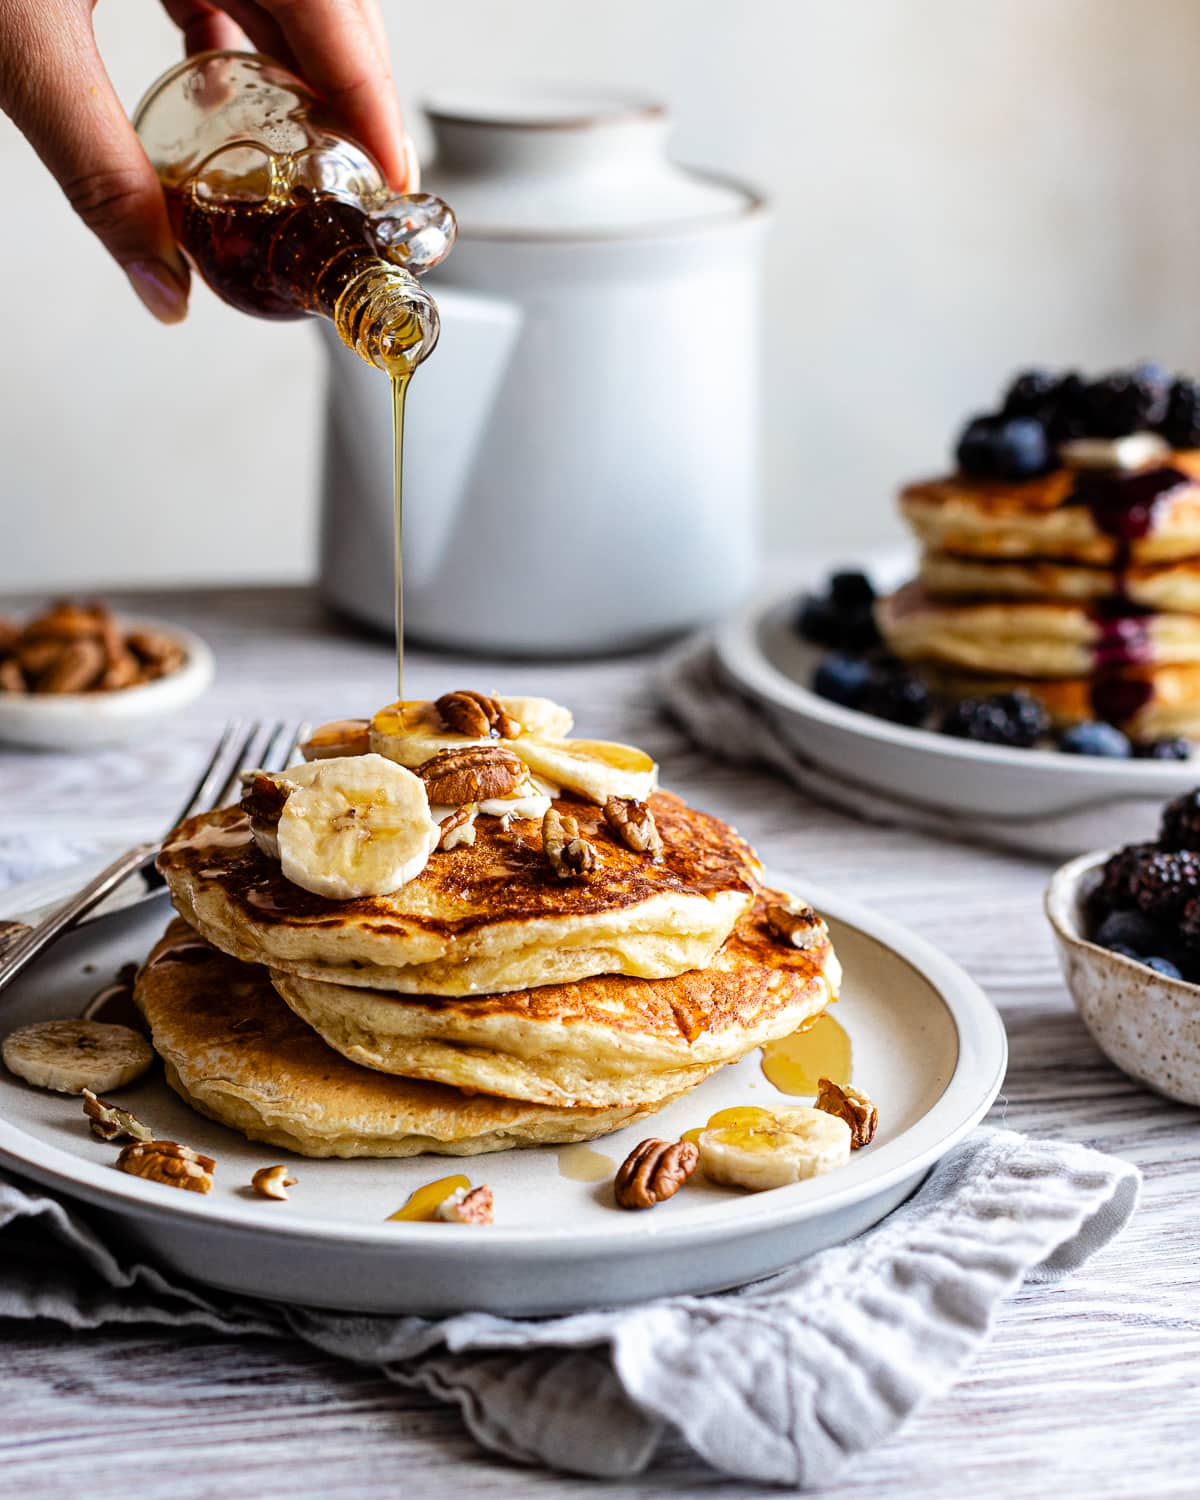 Hand pouring maple syrup on stack of 3 pancakes topped with bananas and pecans.